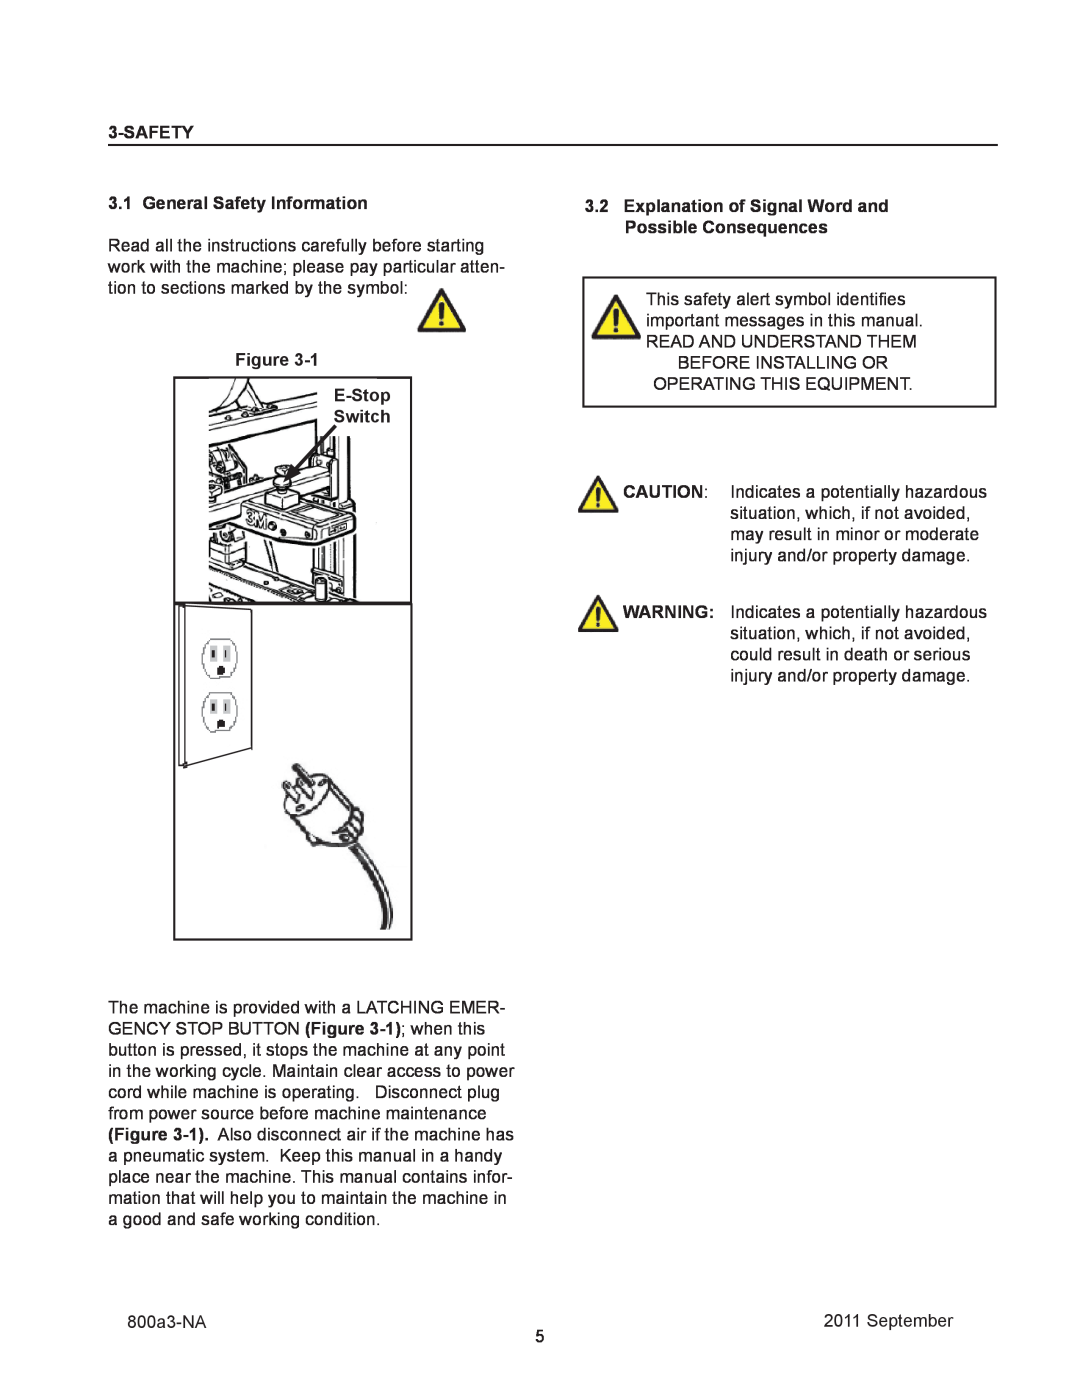 3M 800a3 manual General Safety Information, Figure E-Stop Switch 